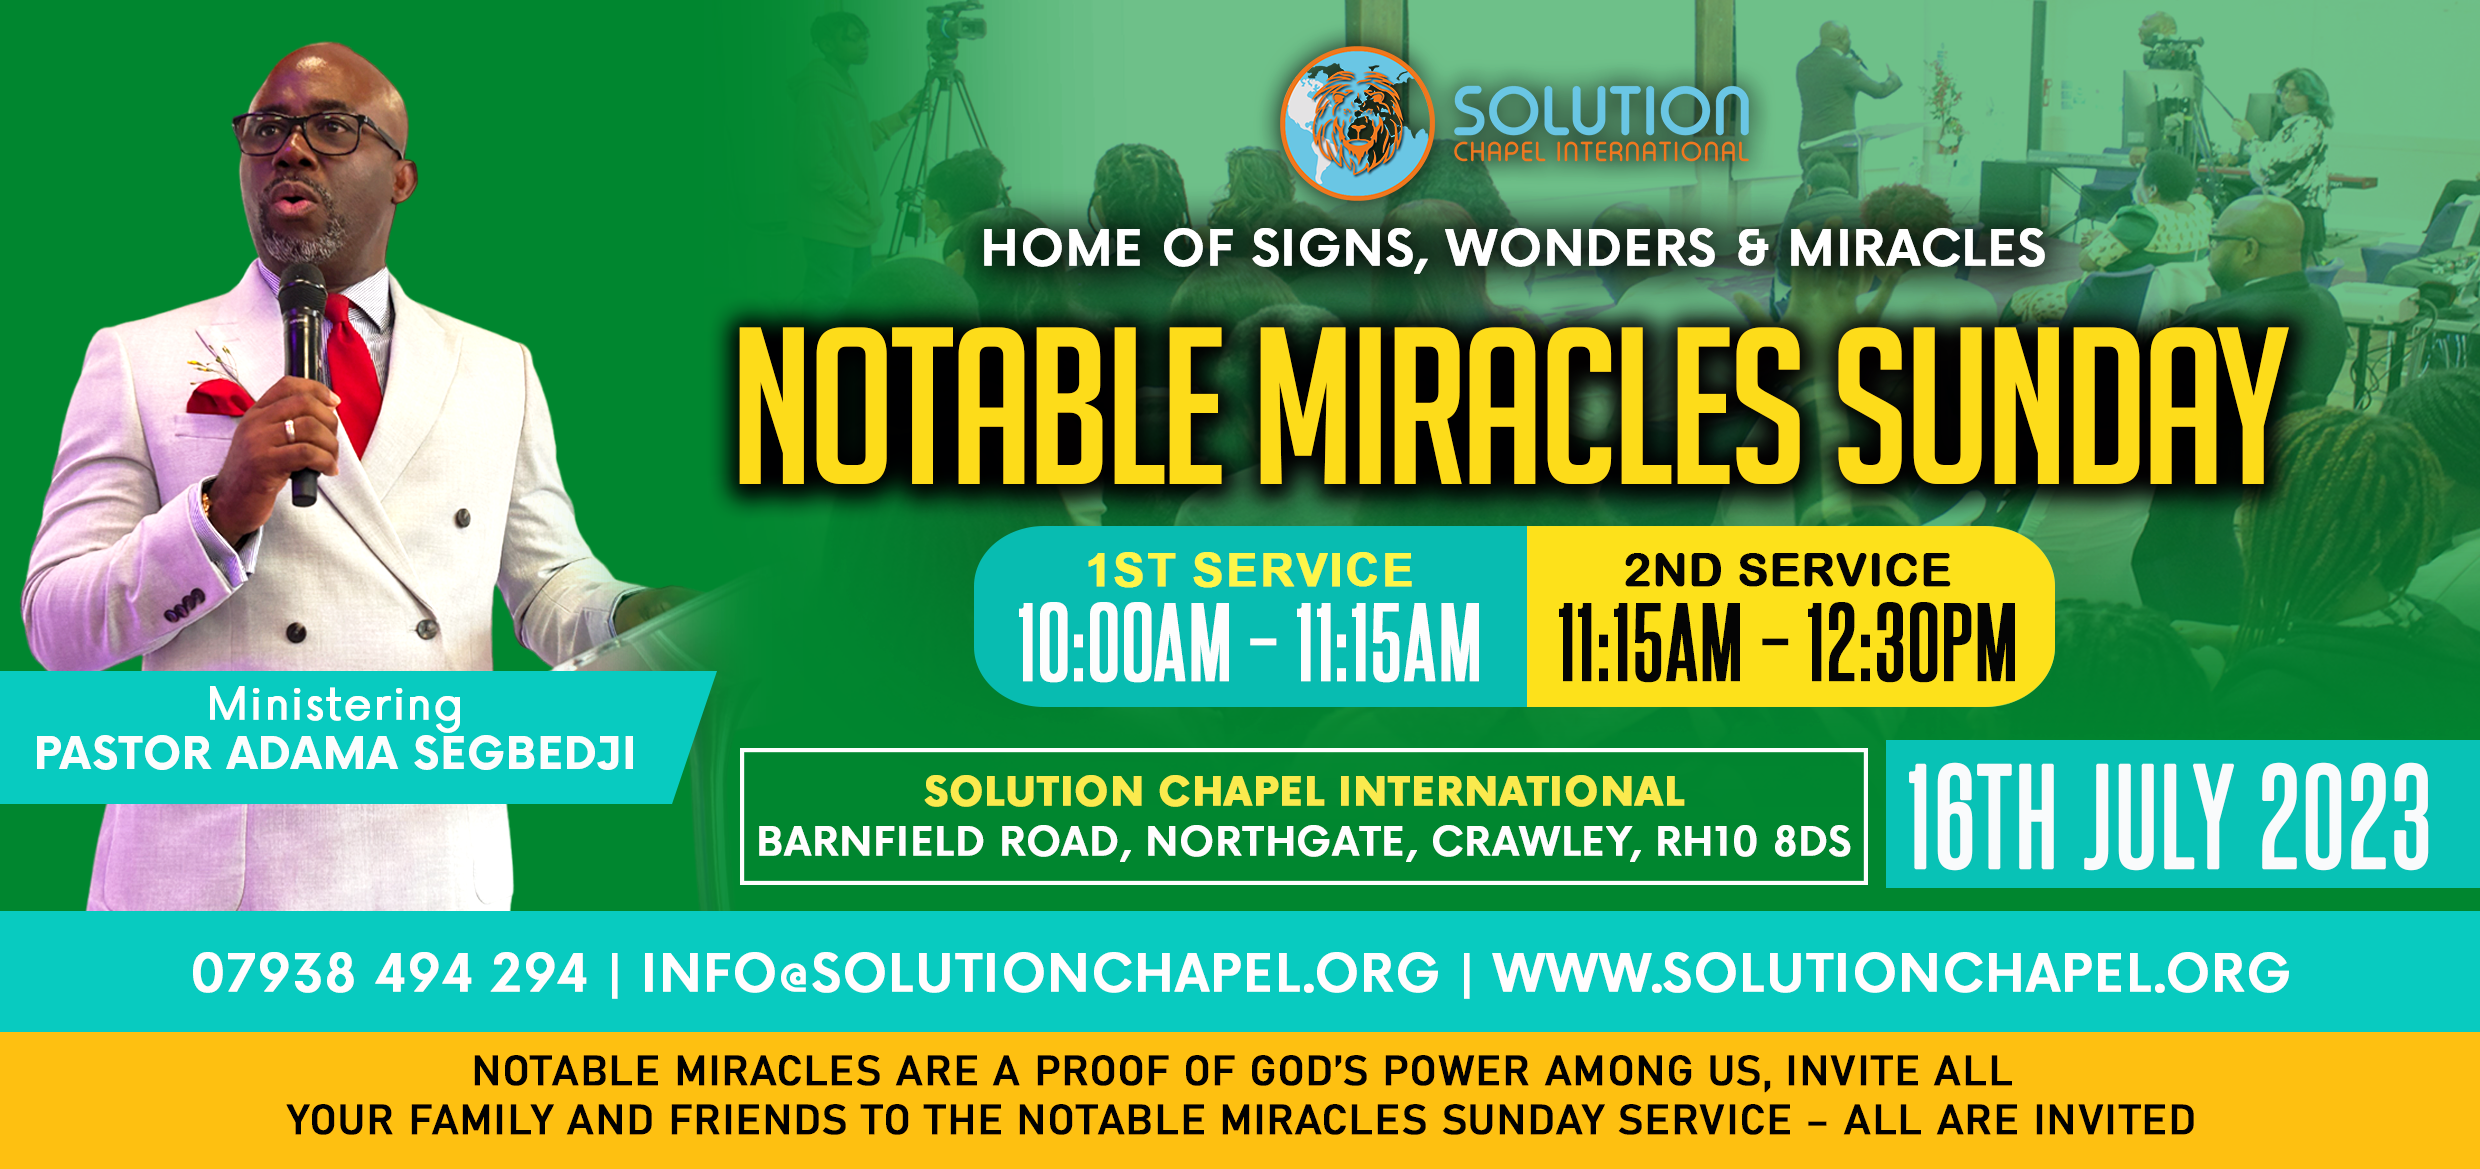 "Notable Miracles Sunday"